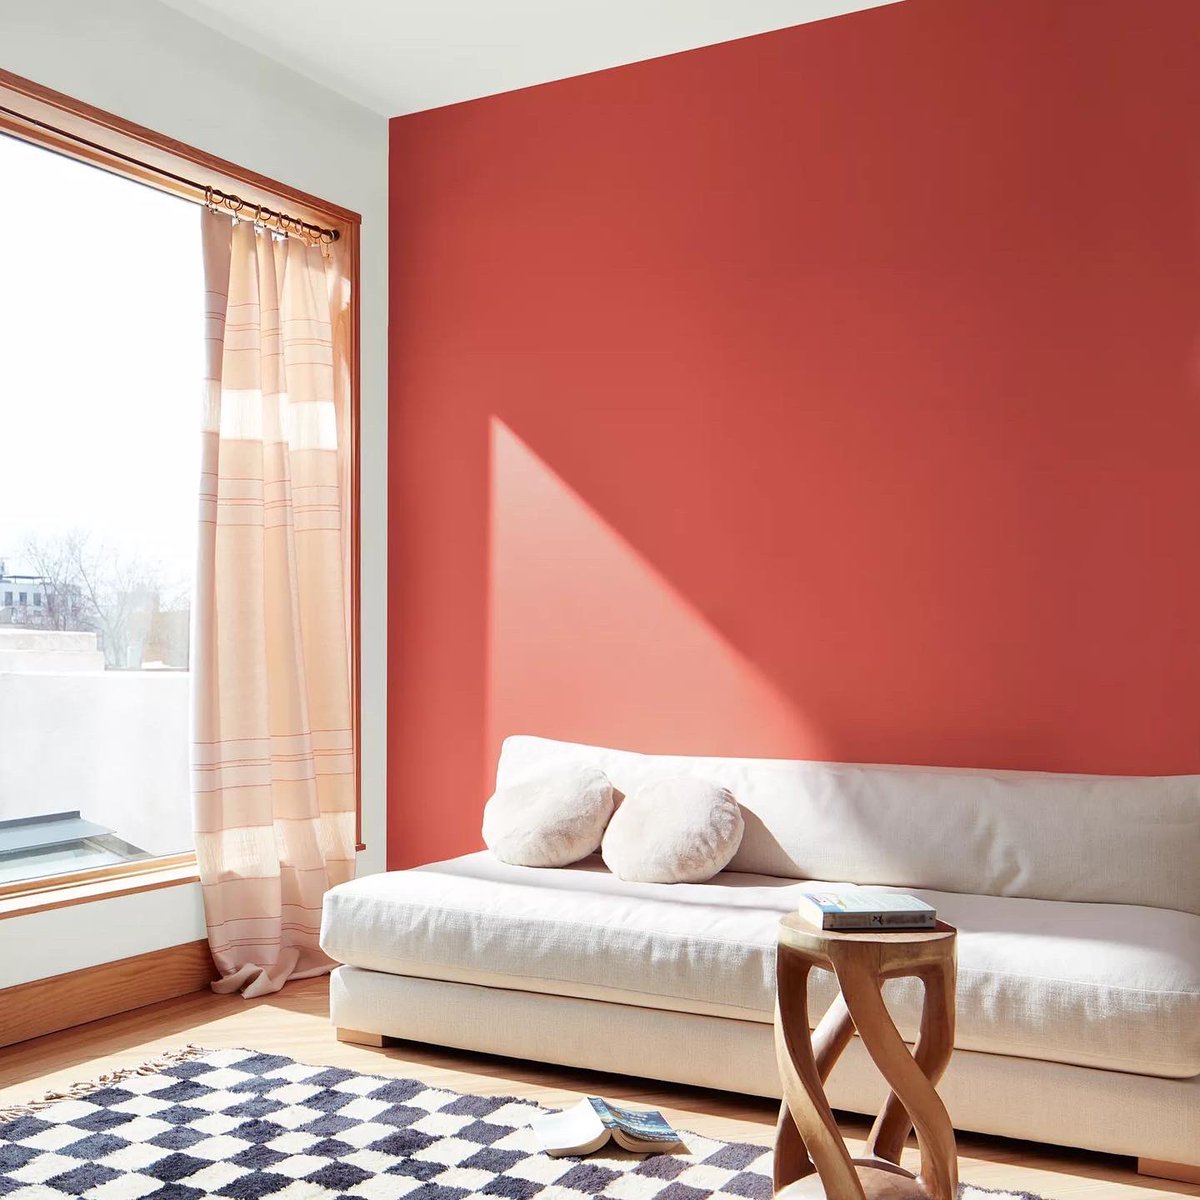 In case you missed it 🎉 Benjamin Moore Color of the Year 2023: Raspberry Blush 🟥 This unapologetic shade of red orange had us thinking: bold, bolder, boldest. #BenjaminMoore #ColorTrends2023 #ColoroftheYear2023 #Paint #HammondLumber 
#HammondLumberCompany